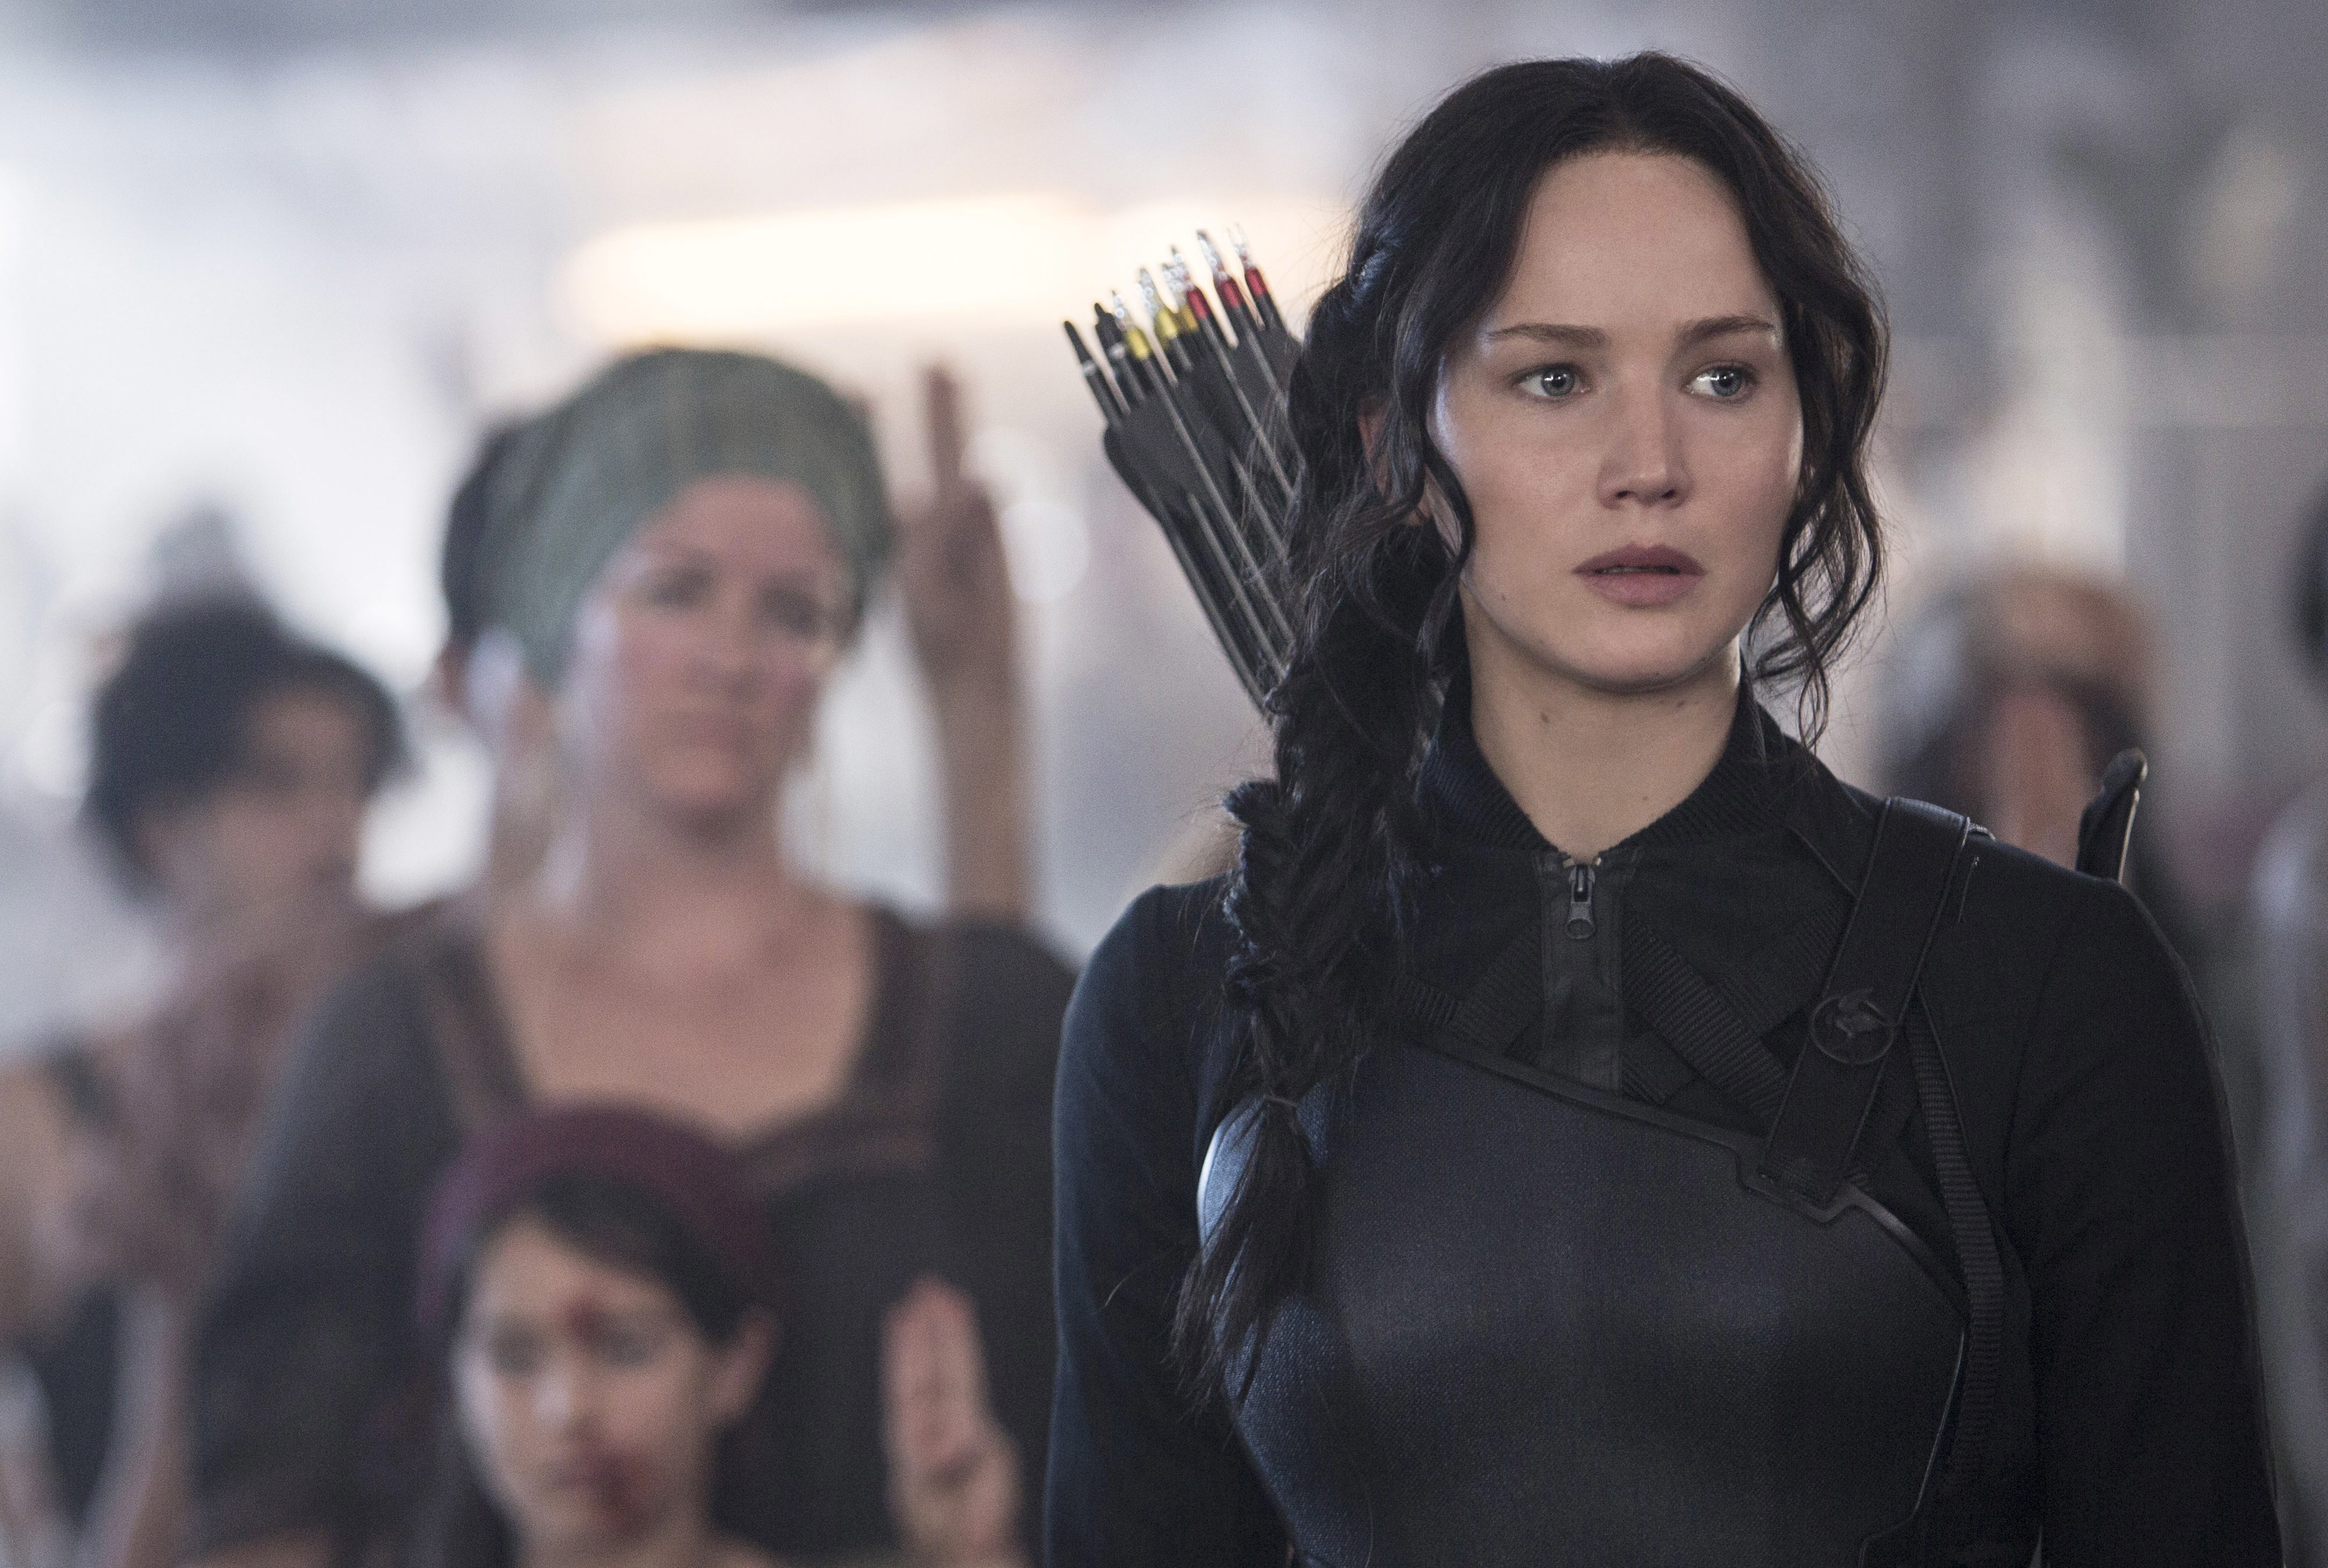 Katniss Everdeen in a dark combat outfit with a quiver of arrows on her back, standing in a crowd